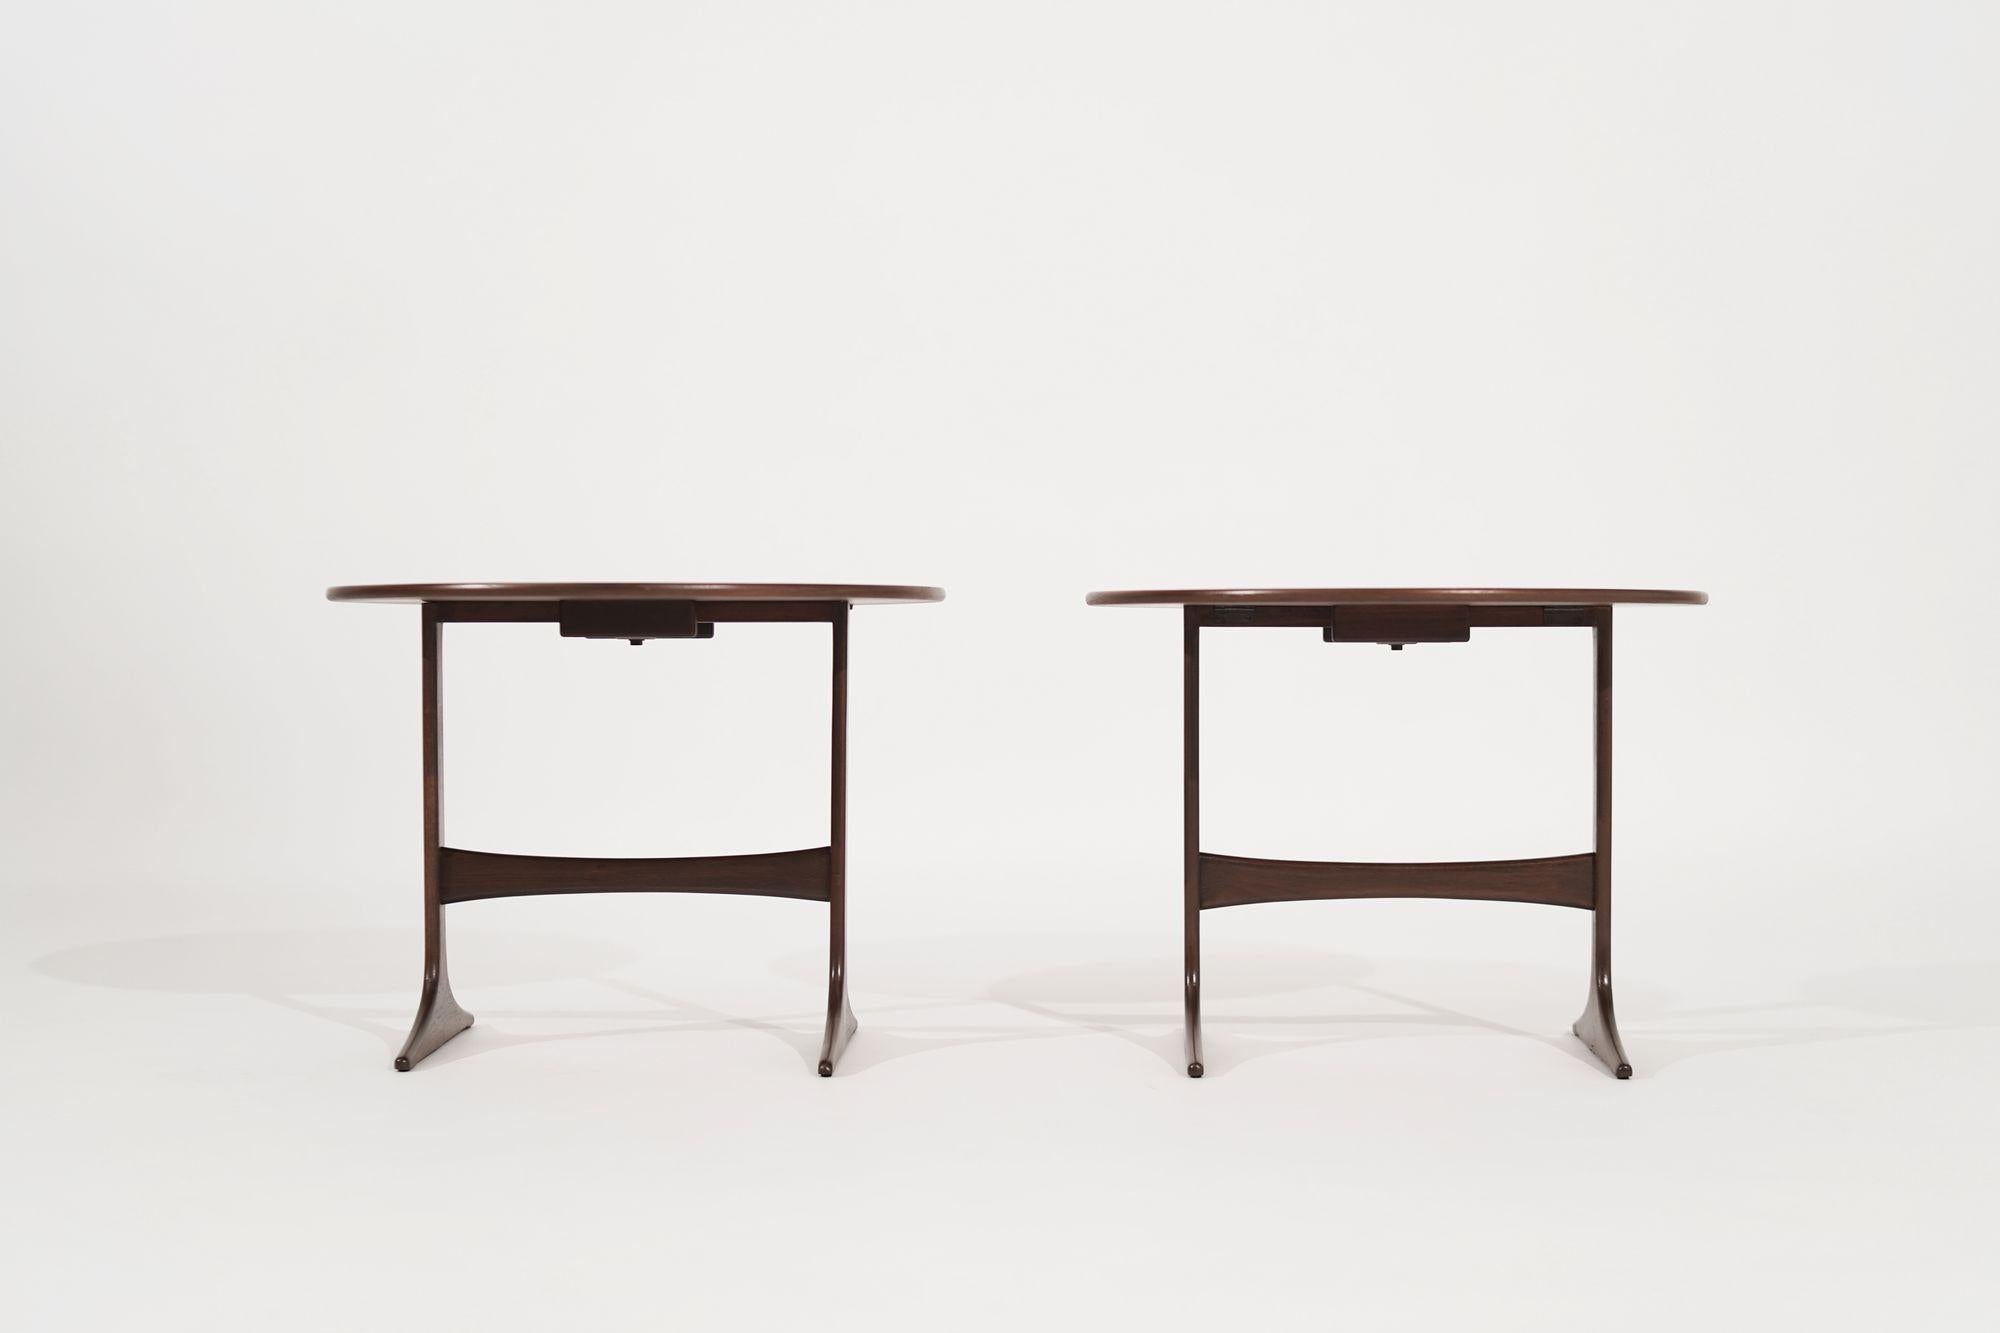 A stunning pair of walnut end tables designed by the renowned Sven Engstrom & Gunnar Myrstrand, fully restored from the 1960s to their original beauty. The tables feature a rich and warm walnut wood finish that radiates a timeless elegance and